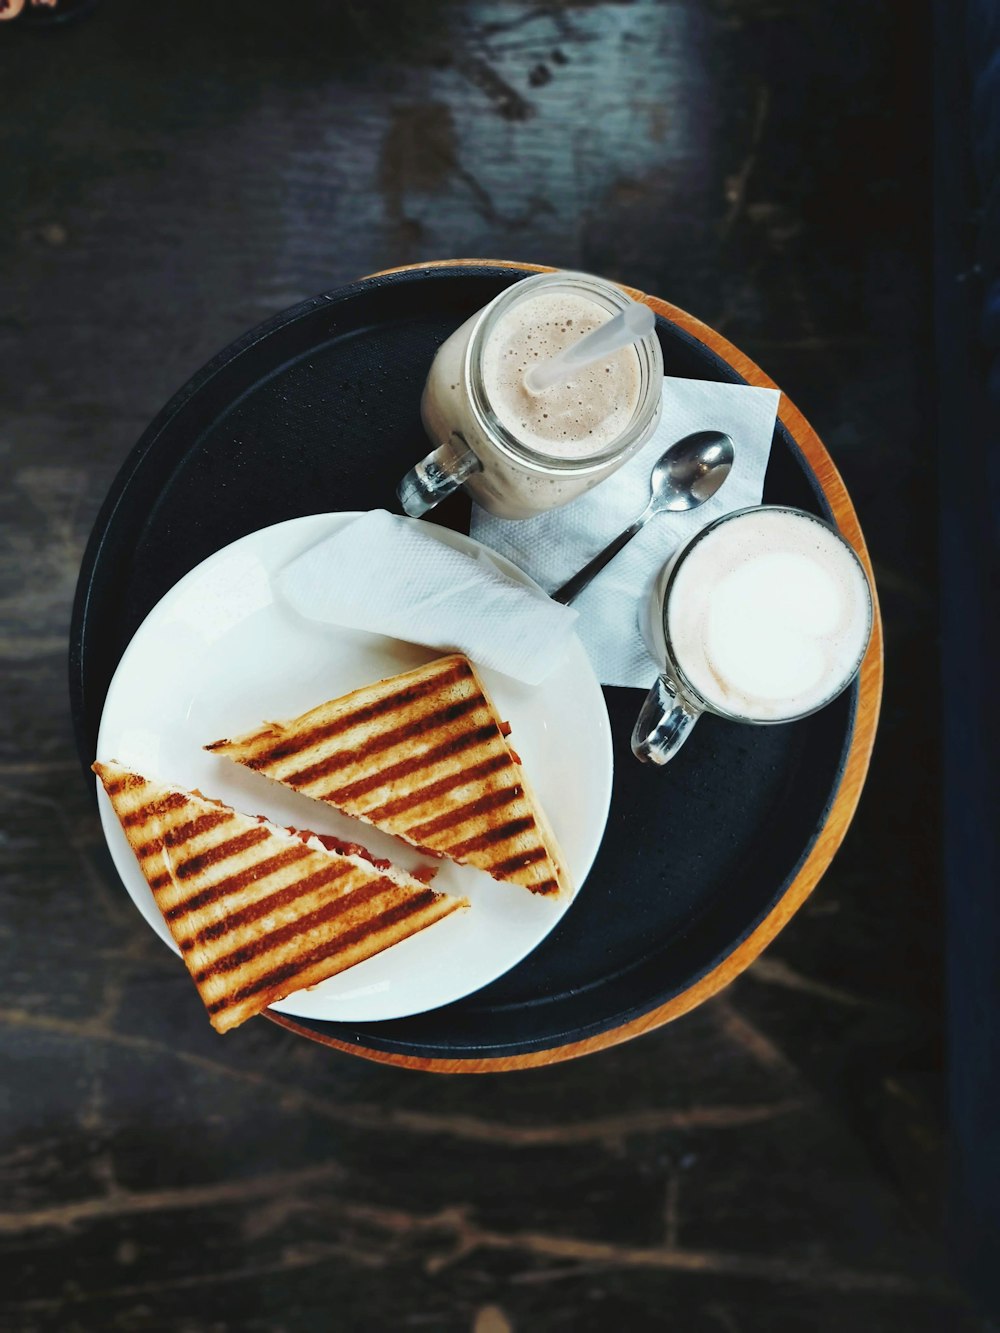 a plate topped with a cut in half sandwich next to a cup of coffee